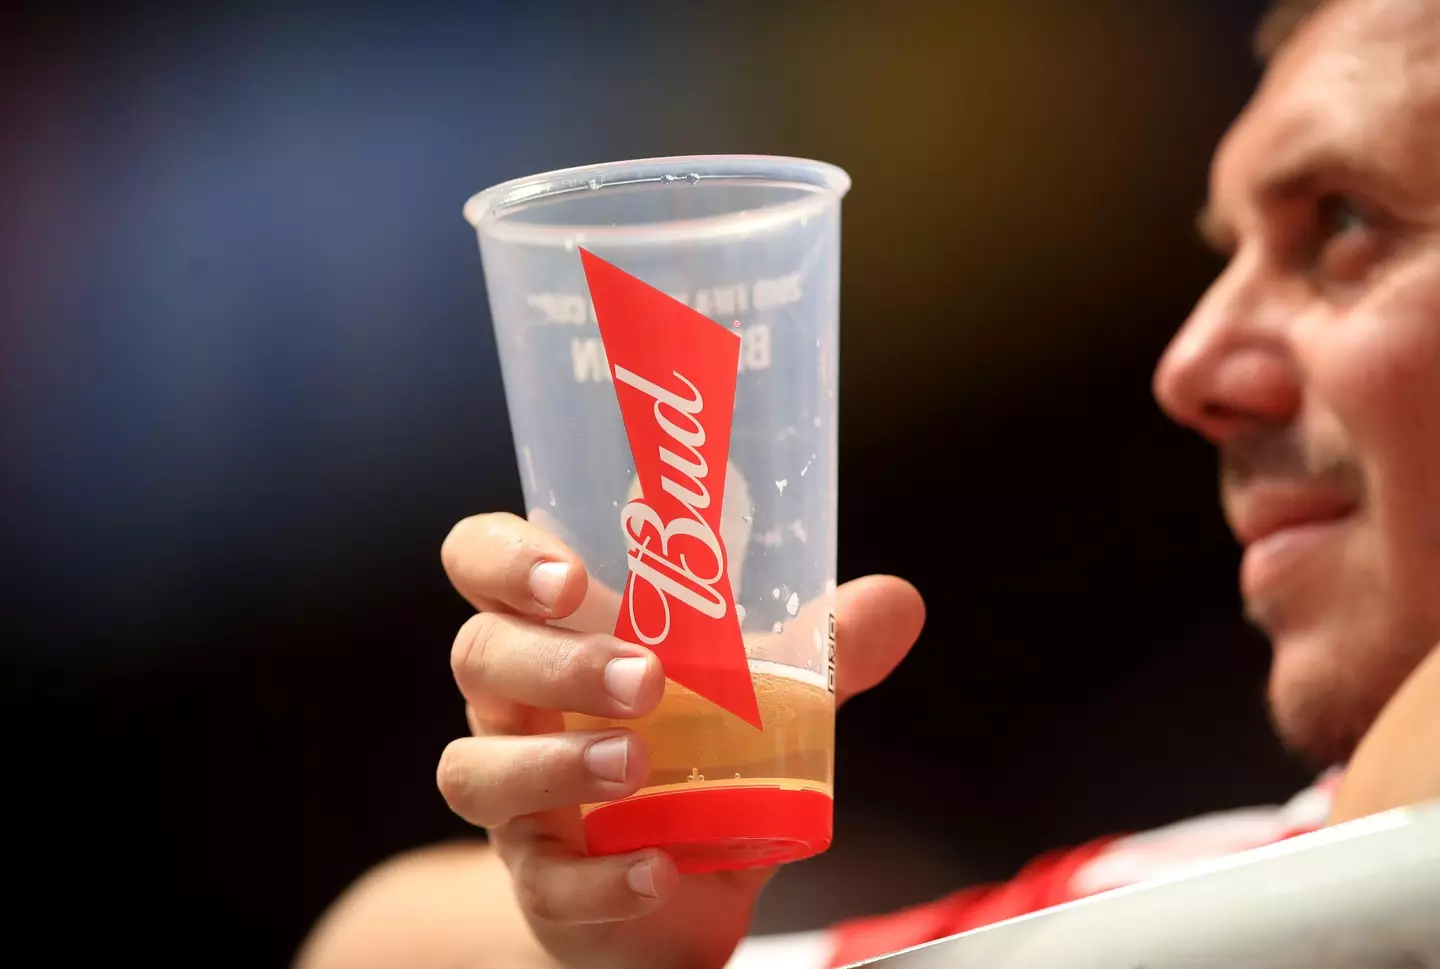 Budweiser have a £63 million deal with FIFA to exclusively sell beer.